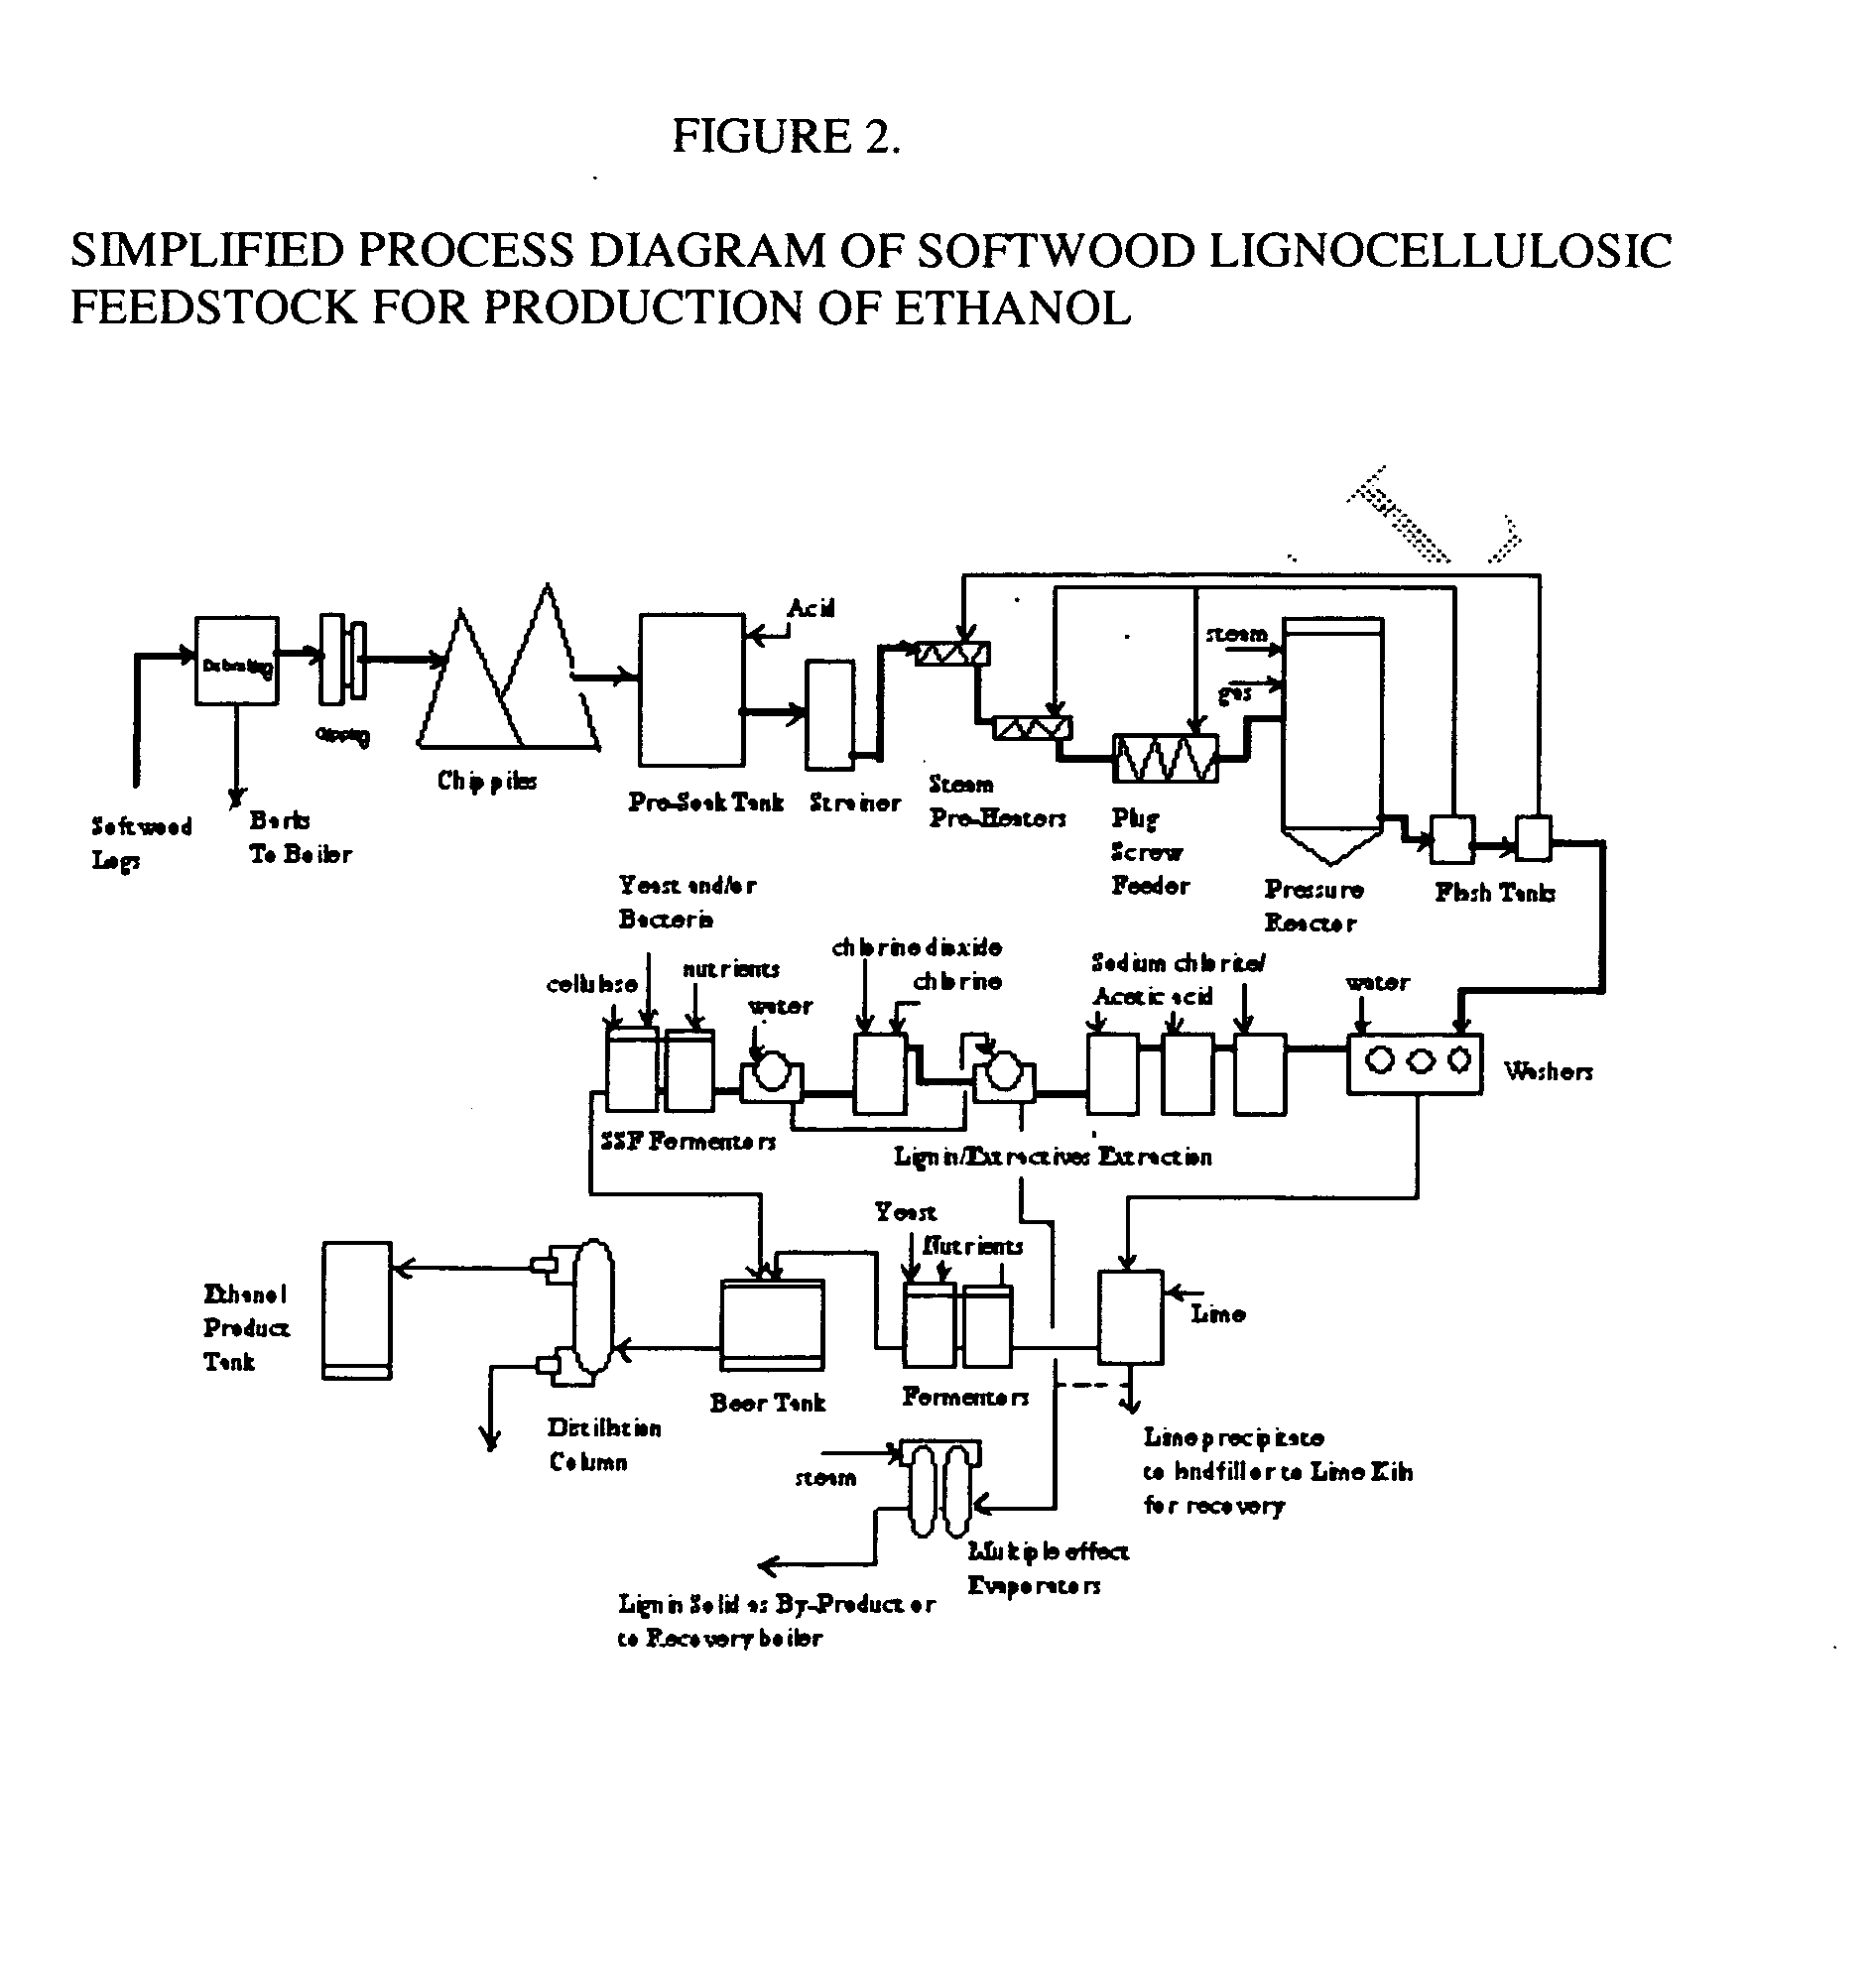 Integrated process for separation of lignocellulosic components to fermentable sugars for production of ethanol and chemicals